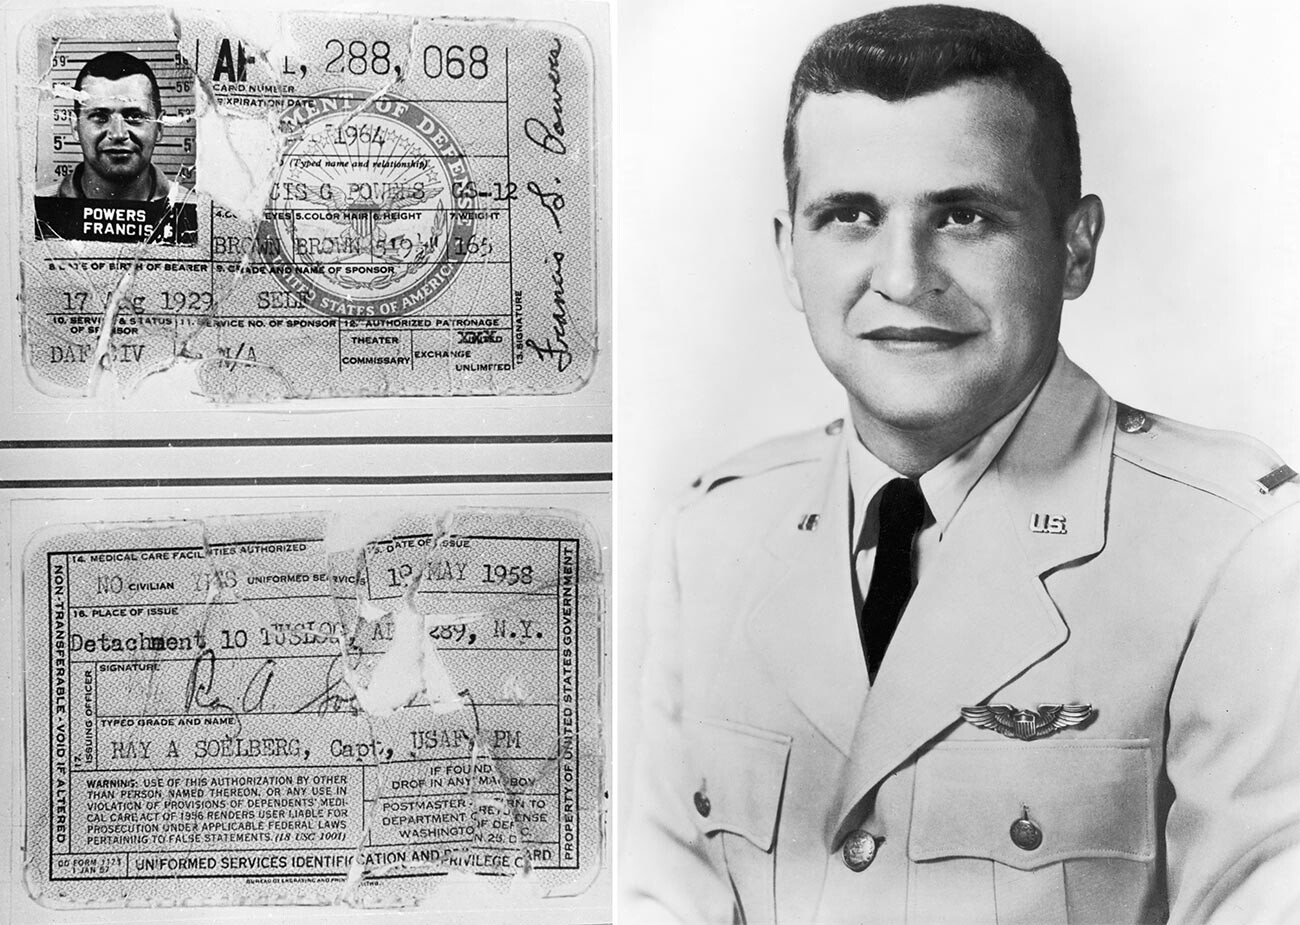 Military identification card of Francis Gary Powers.